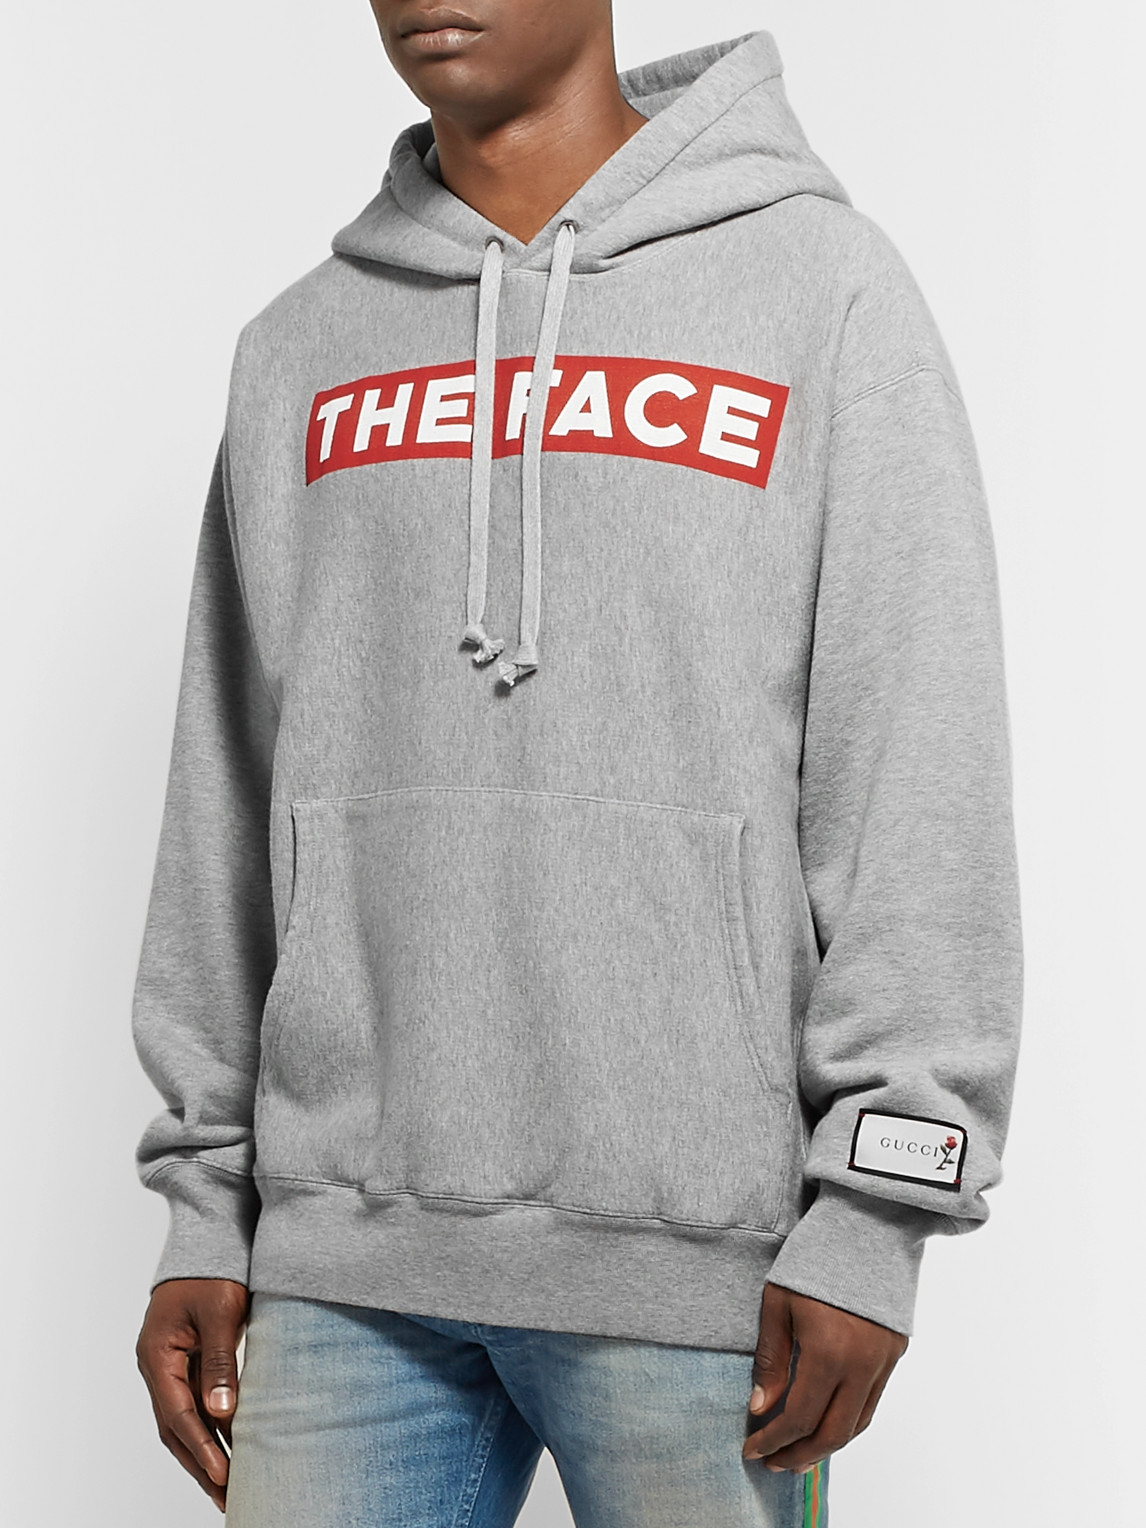 the face hoodie gucci